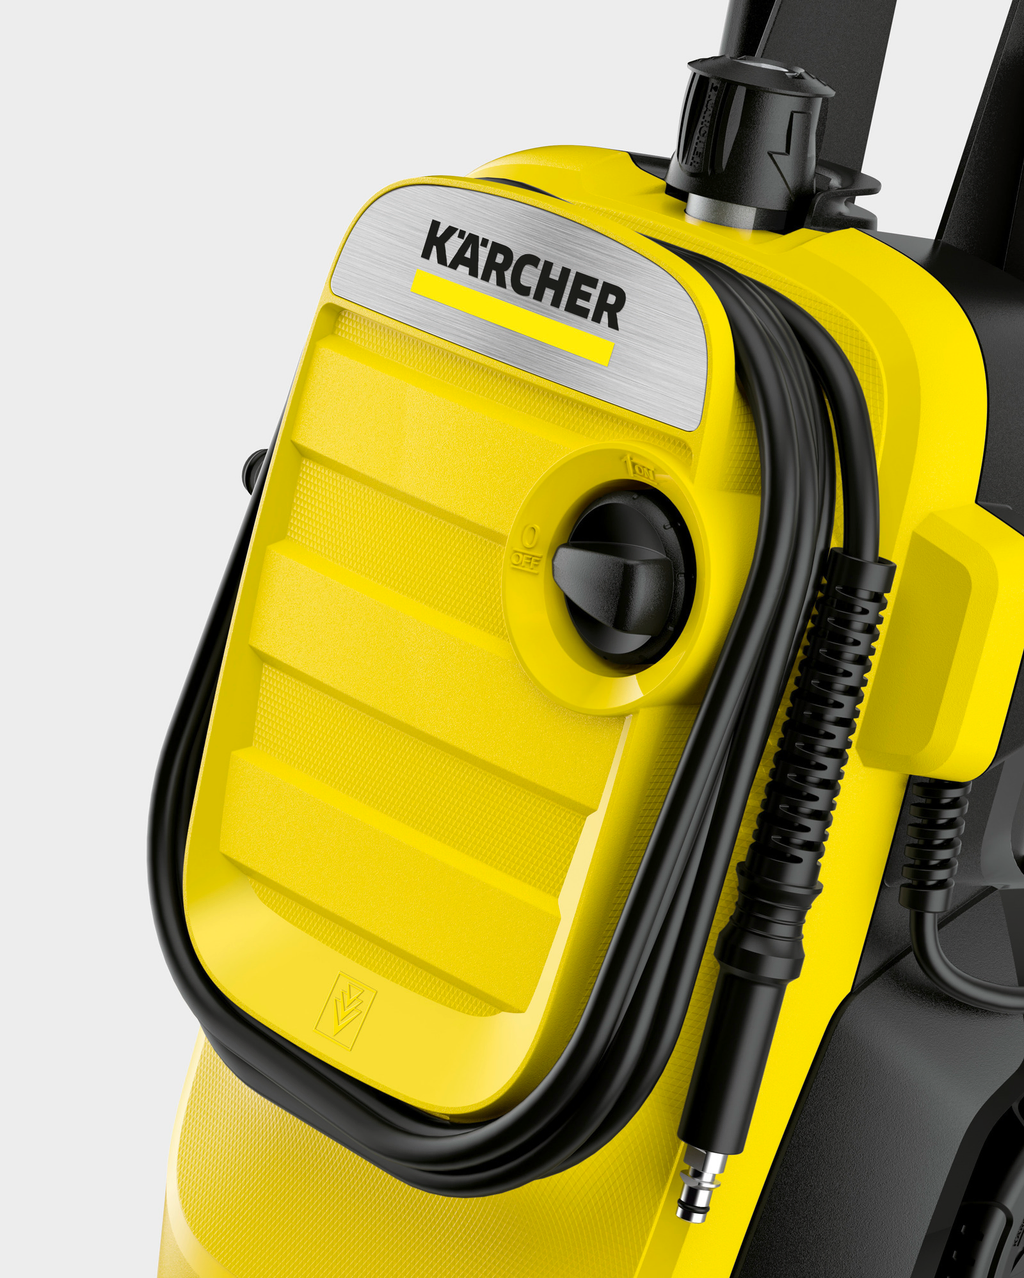 The hose of the Kärcher professional pressure washer K 4 Compact is easy to store